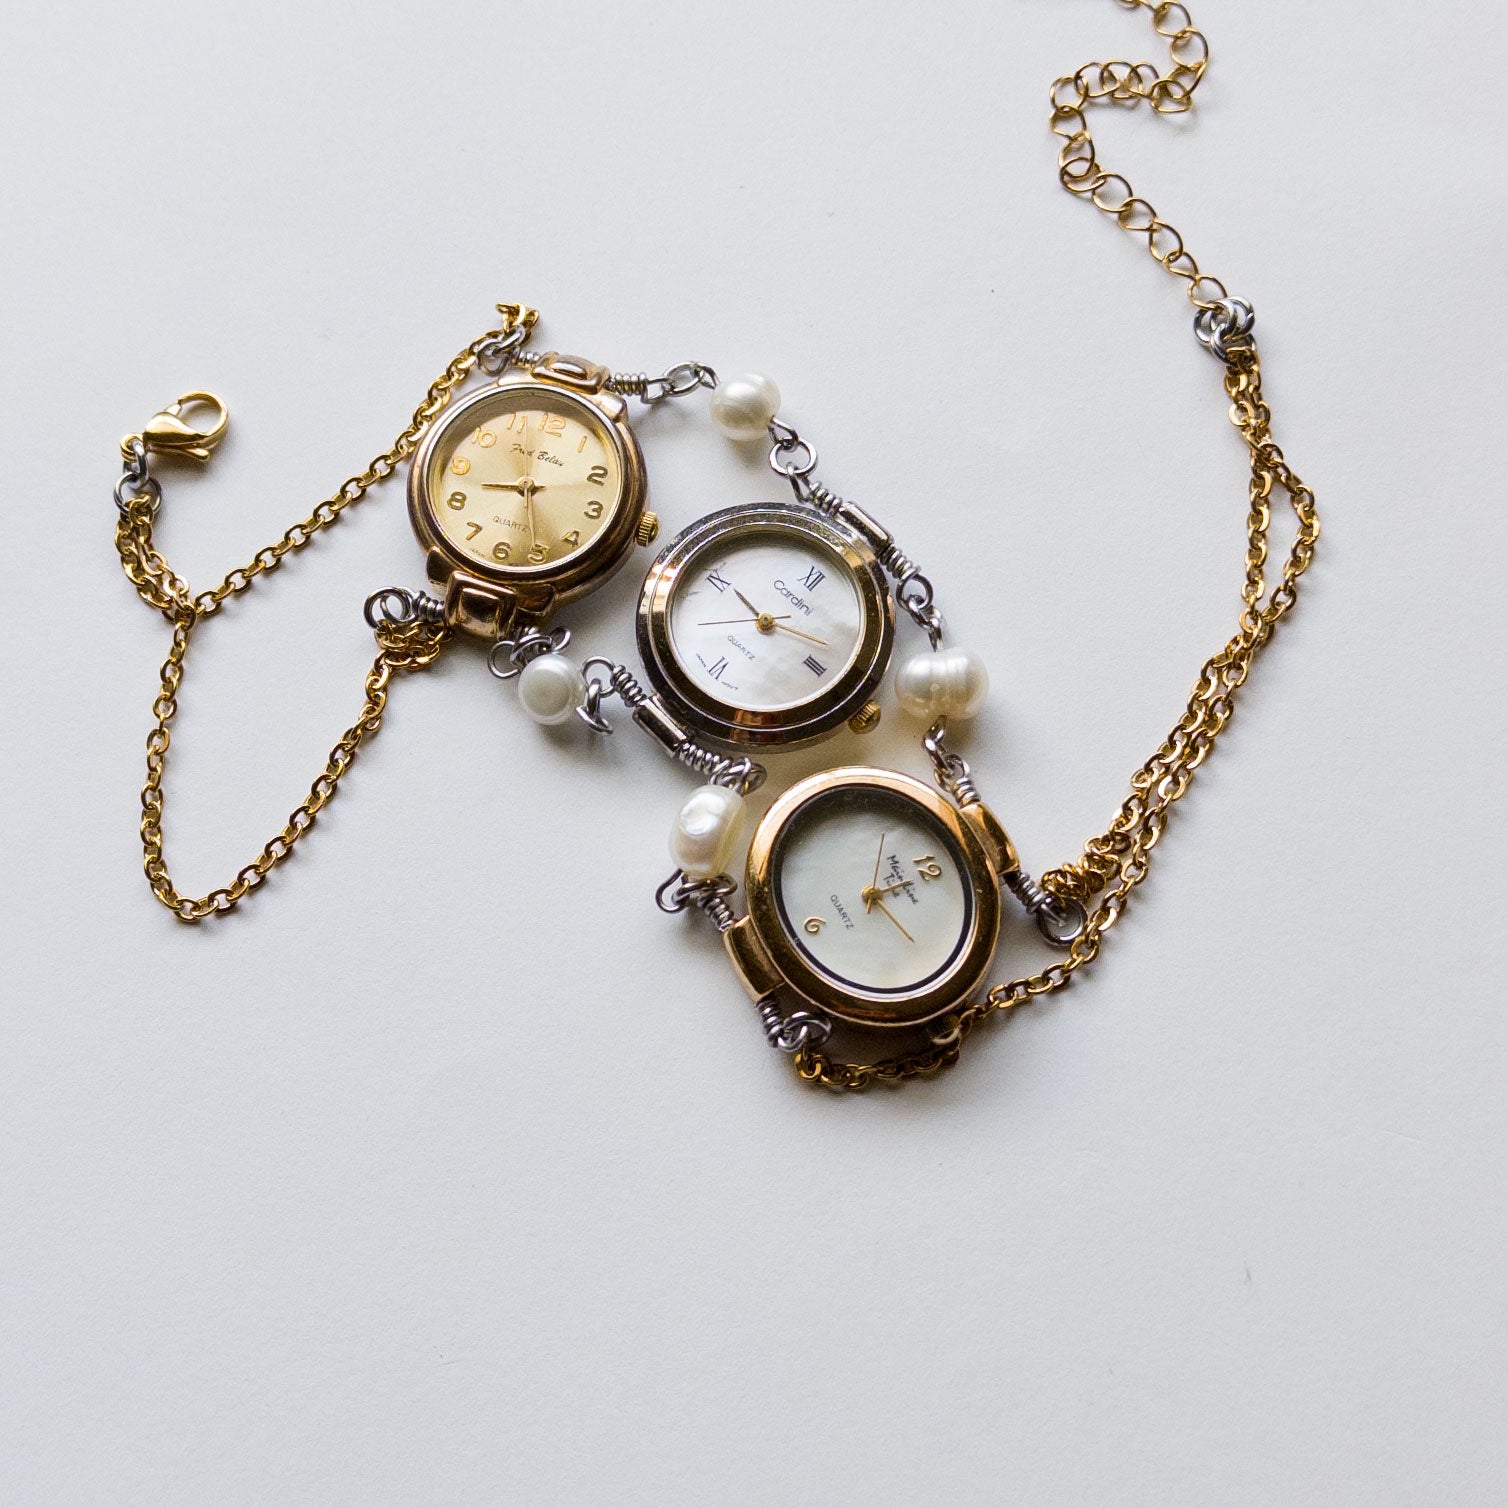 upcycled 3 vintage watch necklace choker stainless steel silver time piece clock classy elegant punk subversive accessories diy avant garde sustainable jewelry fashion futuristic   gold pearls